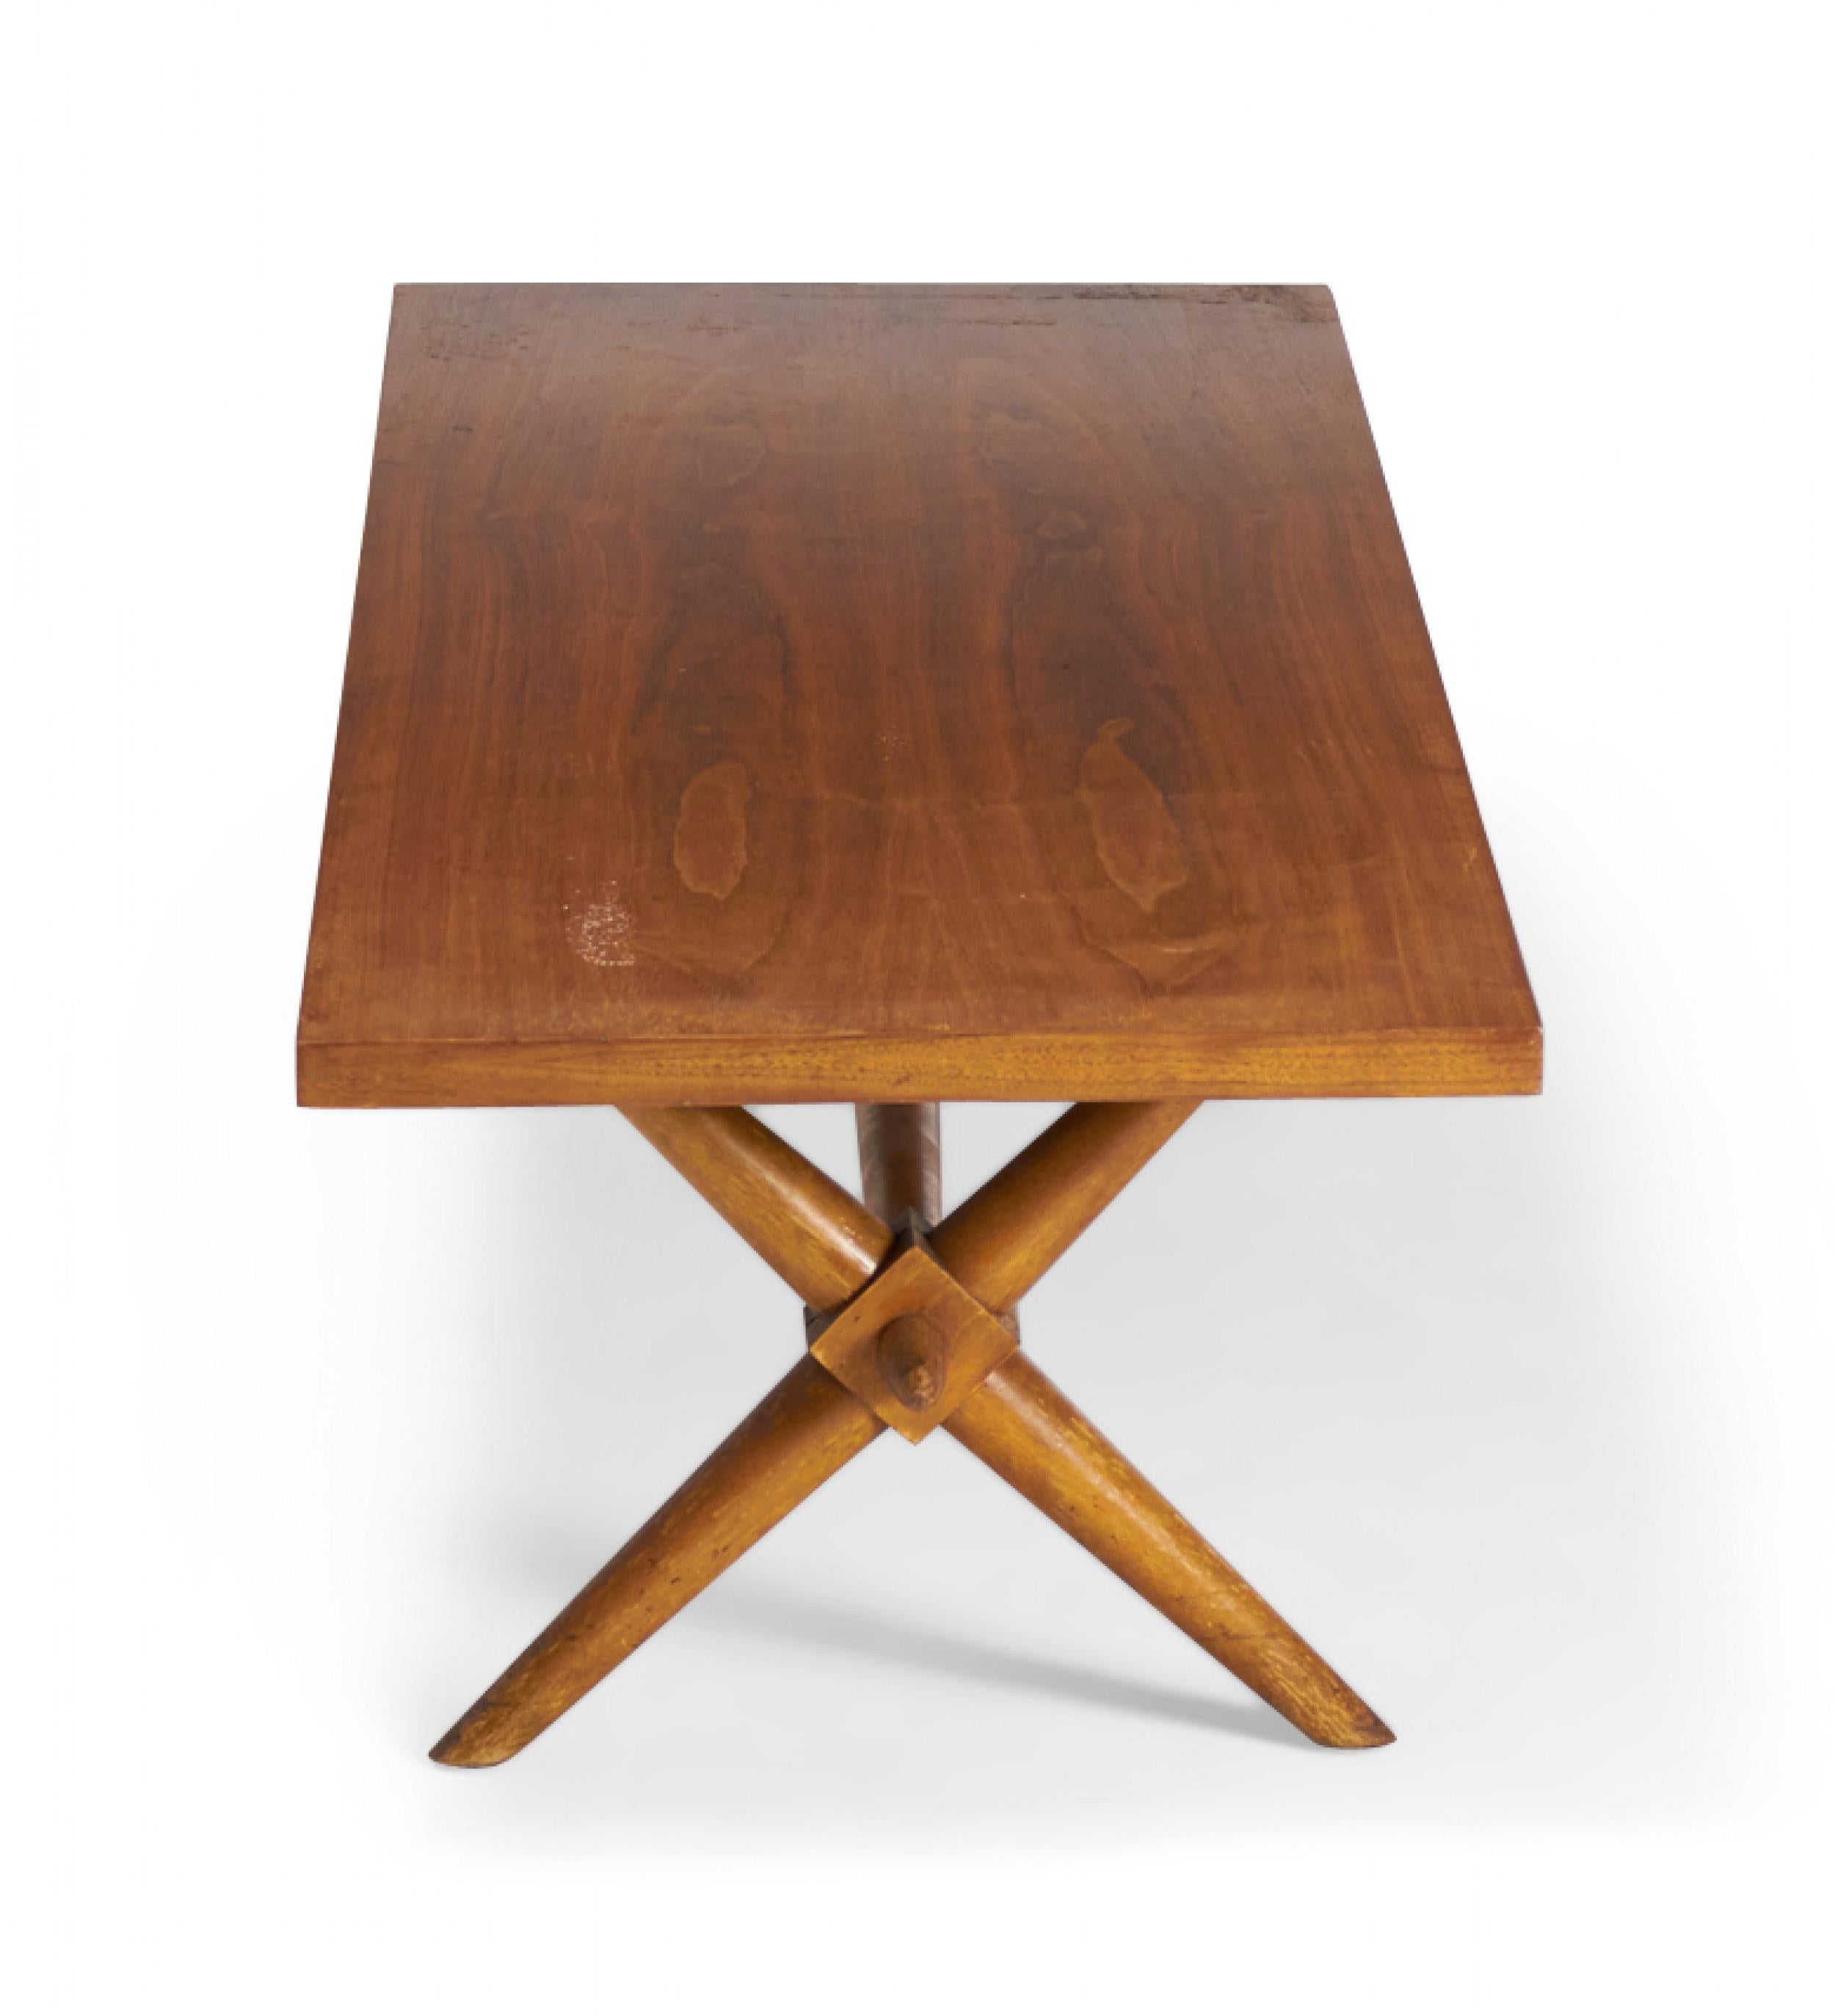 American Mid-Century walnut coffee / cocktail table with a rectangular top resting on a crossed trestle base. (T.H. ROBSJOHN-GIBBINGS)
